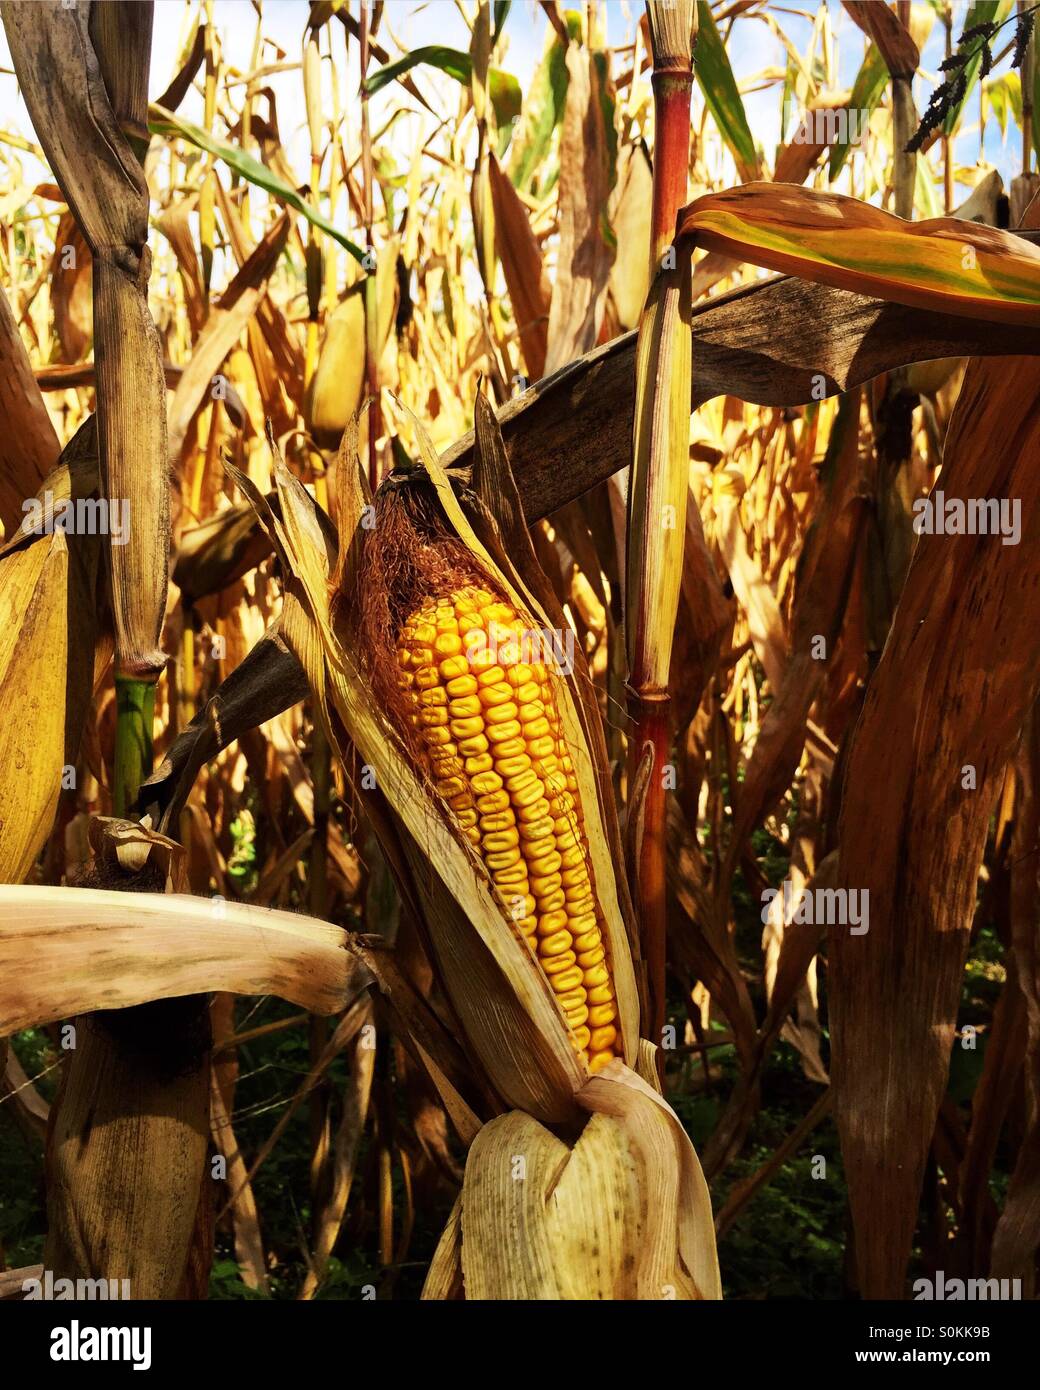 Close up of ear of corn still on the stalk. Stock Photo